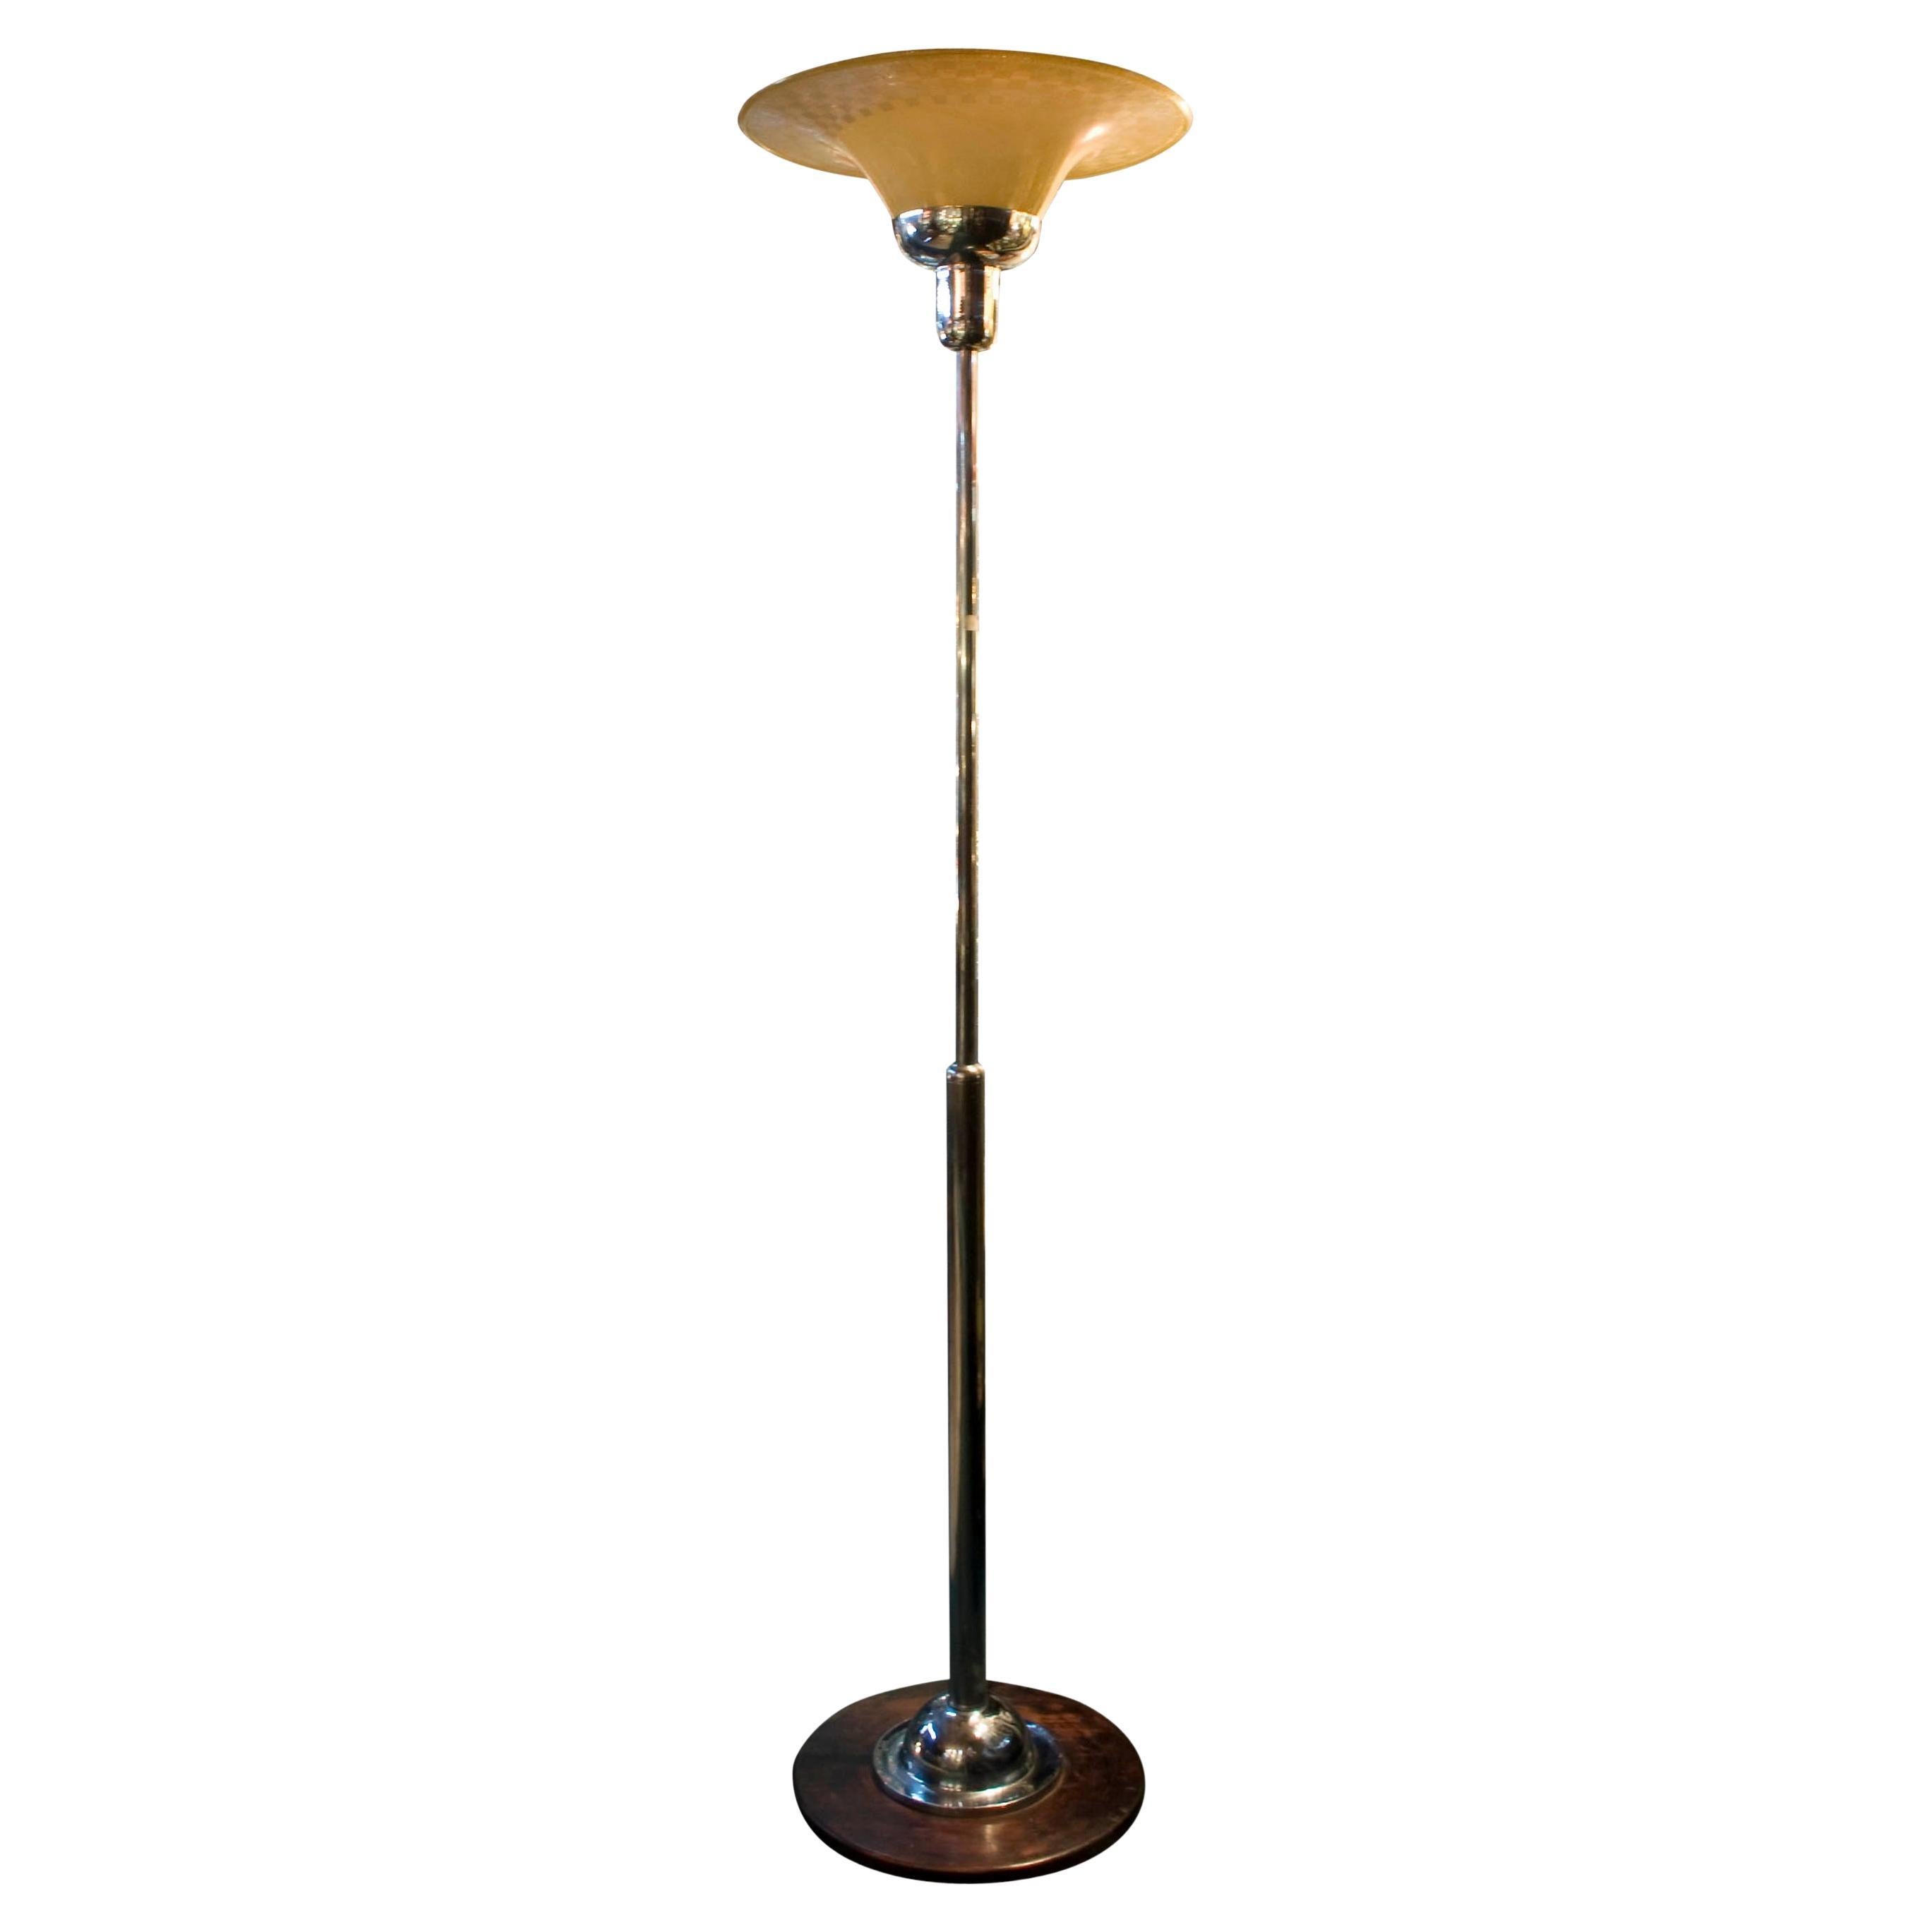 Floor Lamp Art Deco 1930, German, Material: Wood, chrome and glass For Sale